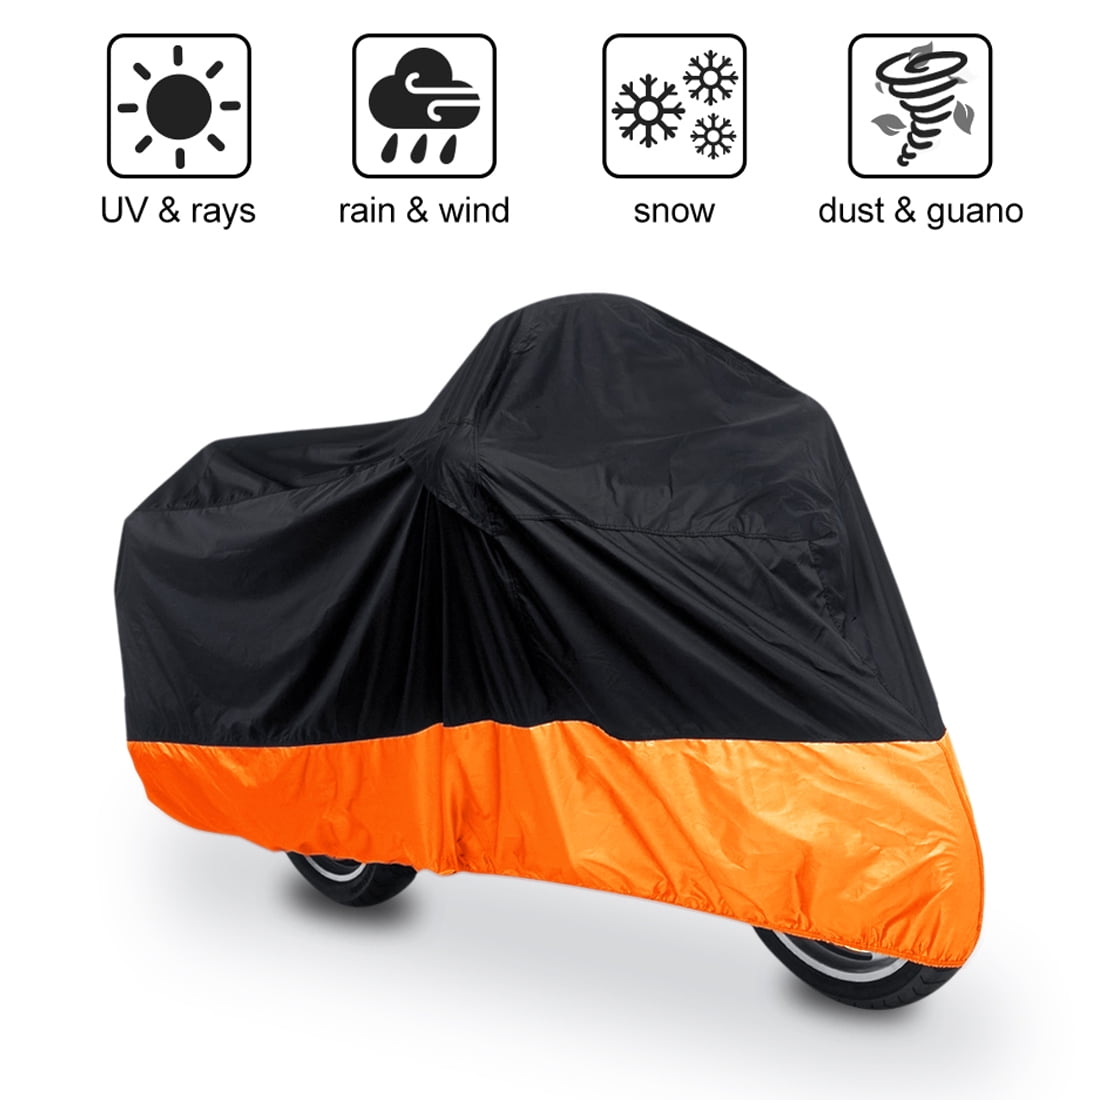 XXXL Waterproof Motorcycle Cover For Harley Davidson Street Glide FLHX Touring 